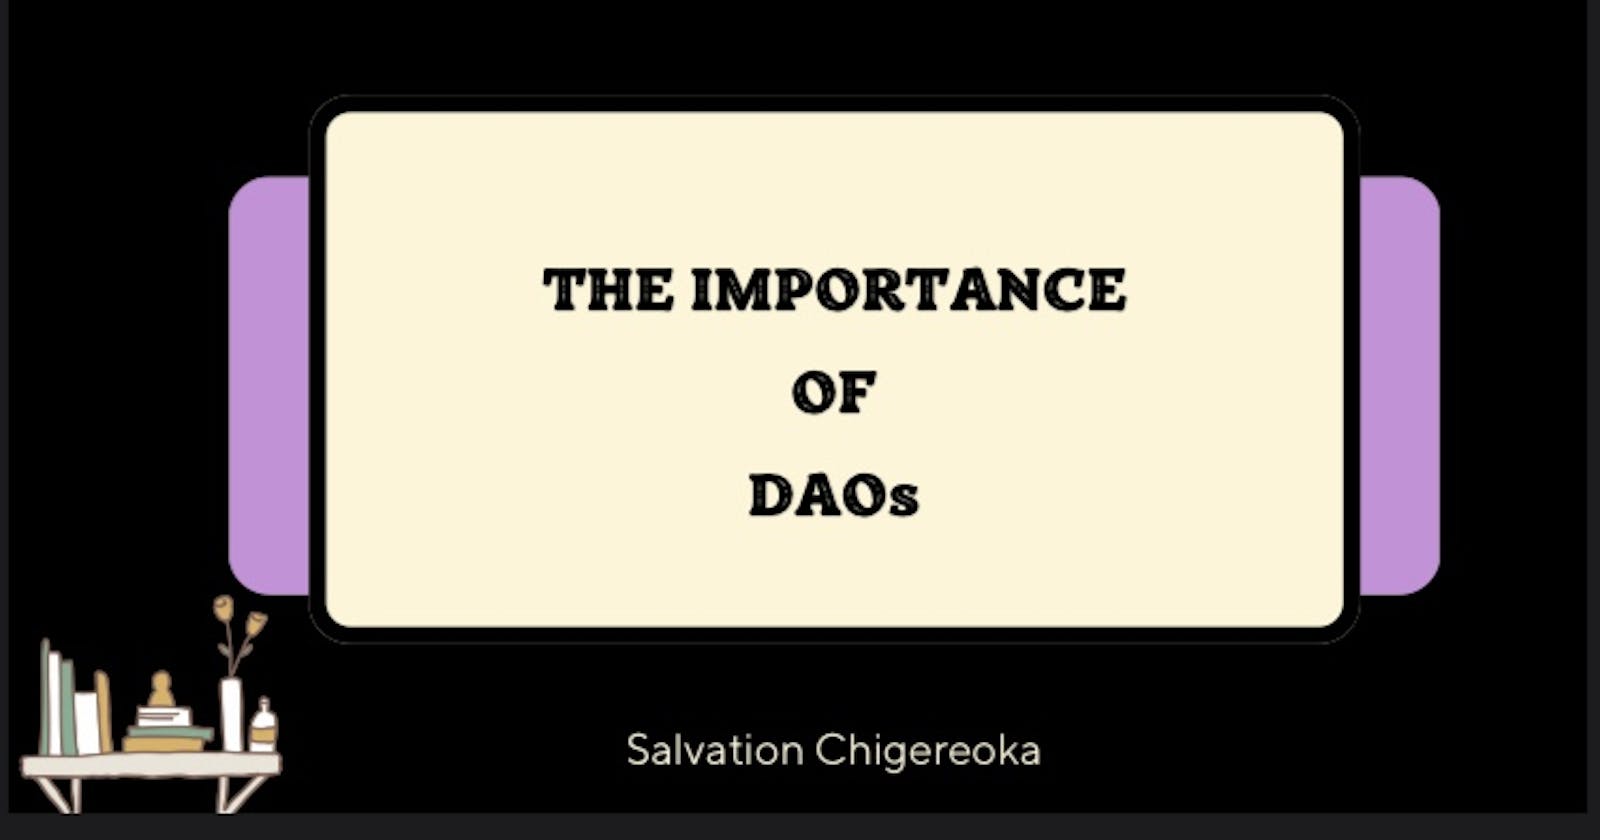 The Importance of DAOs